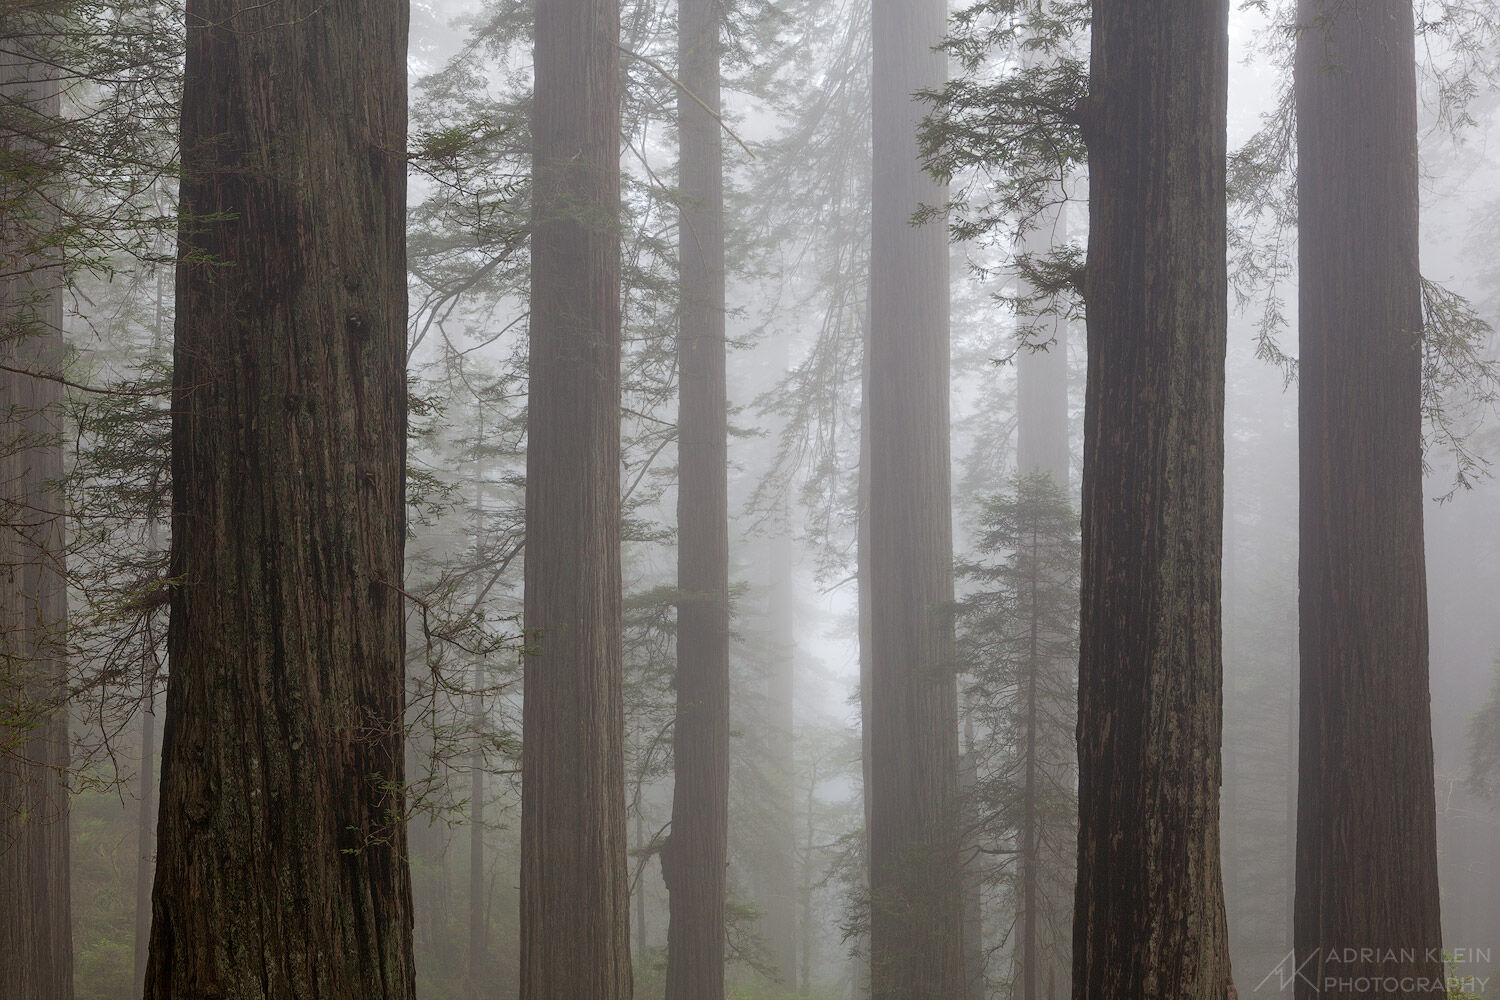 Hiking in the Redwoods of Northern California this beautiful and serene scene of fog and tree trunks captivated my attention....